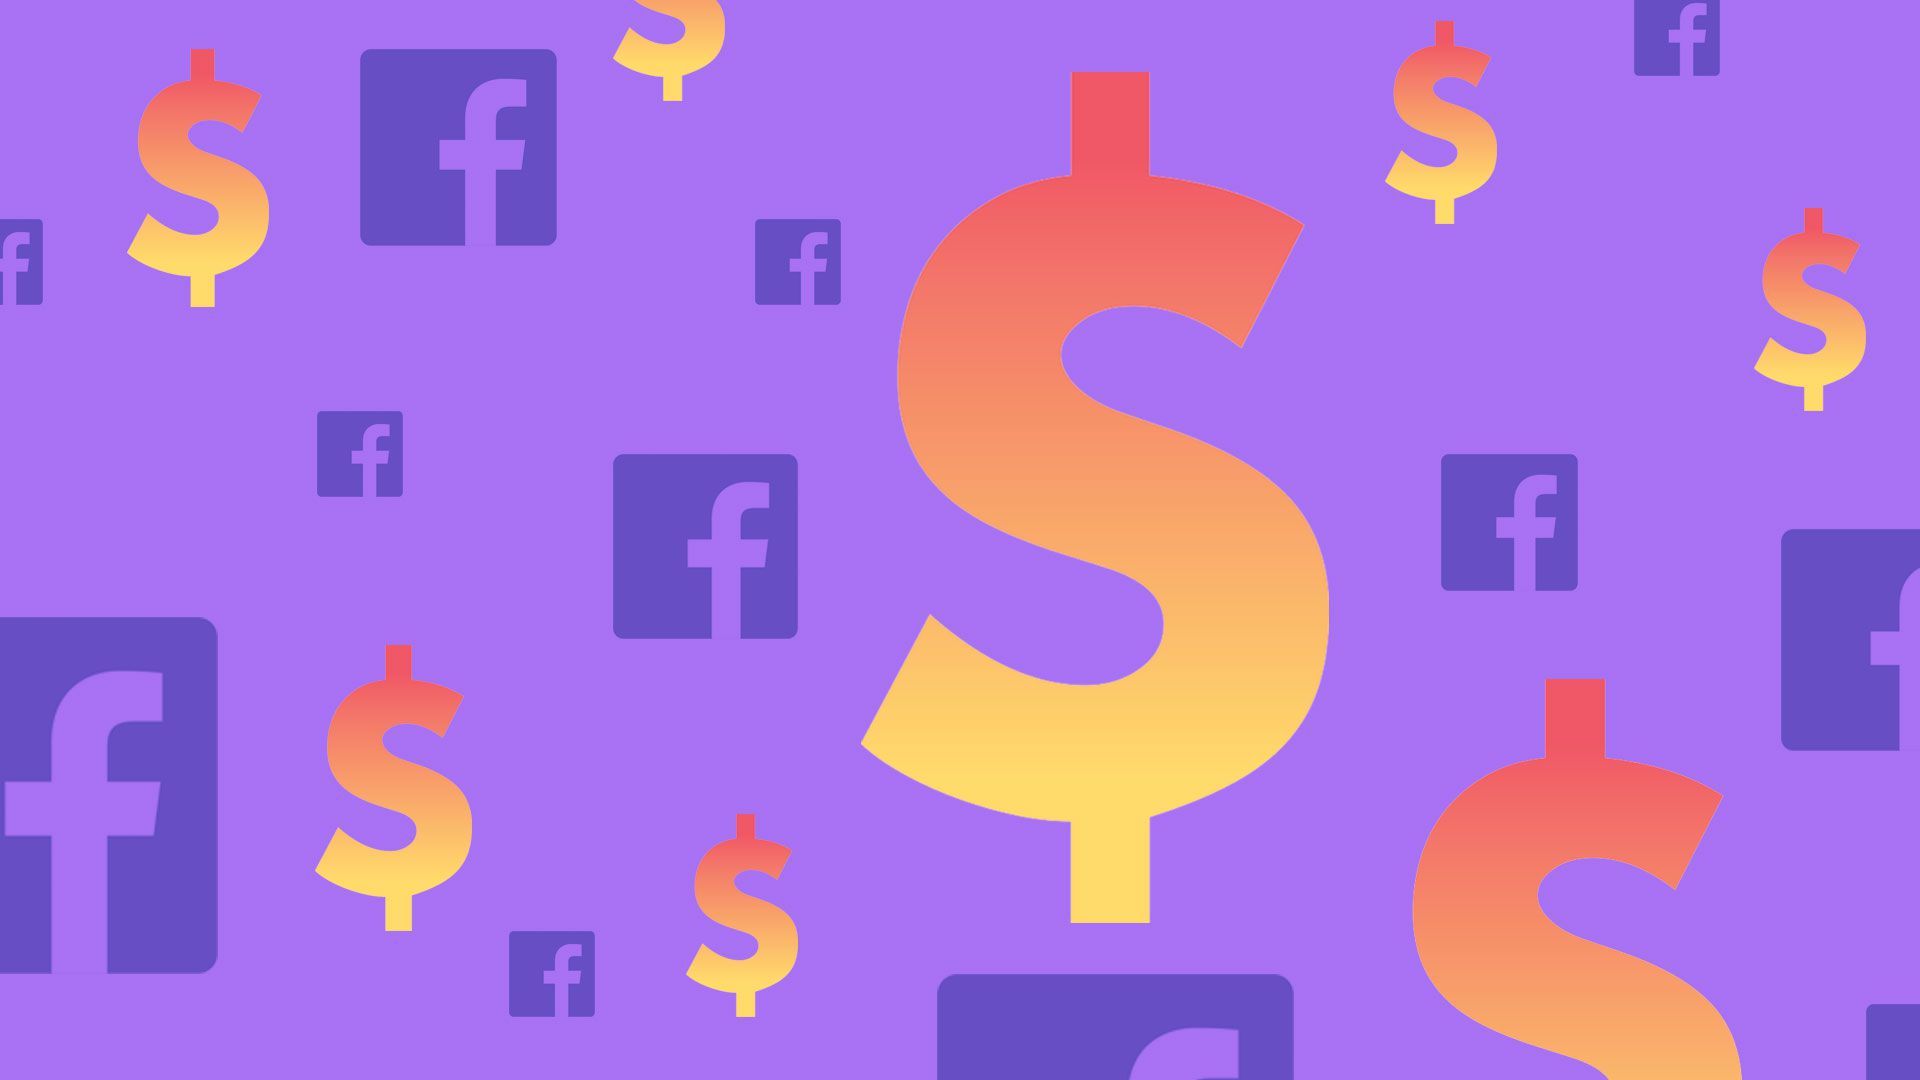 An illustration of the Facebook logo and dollar signs against a purple background